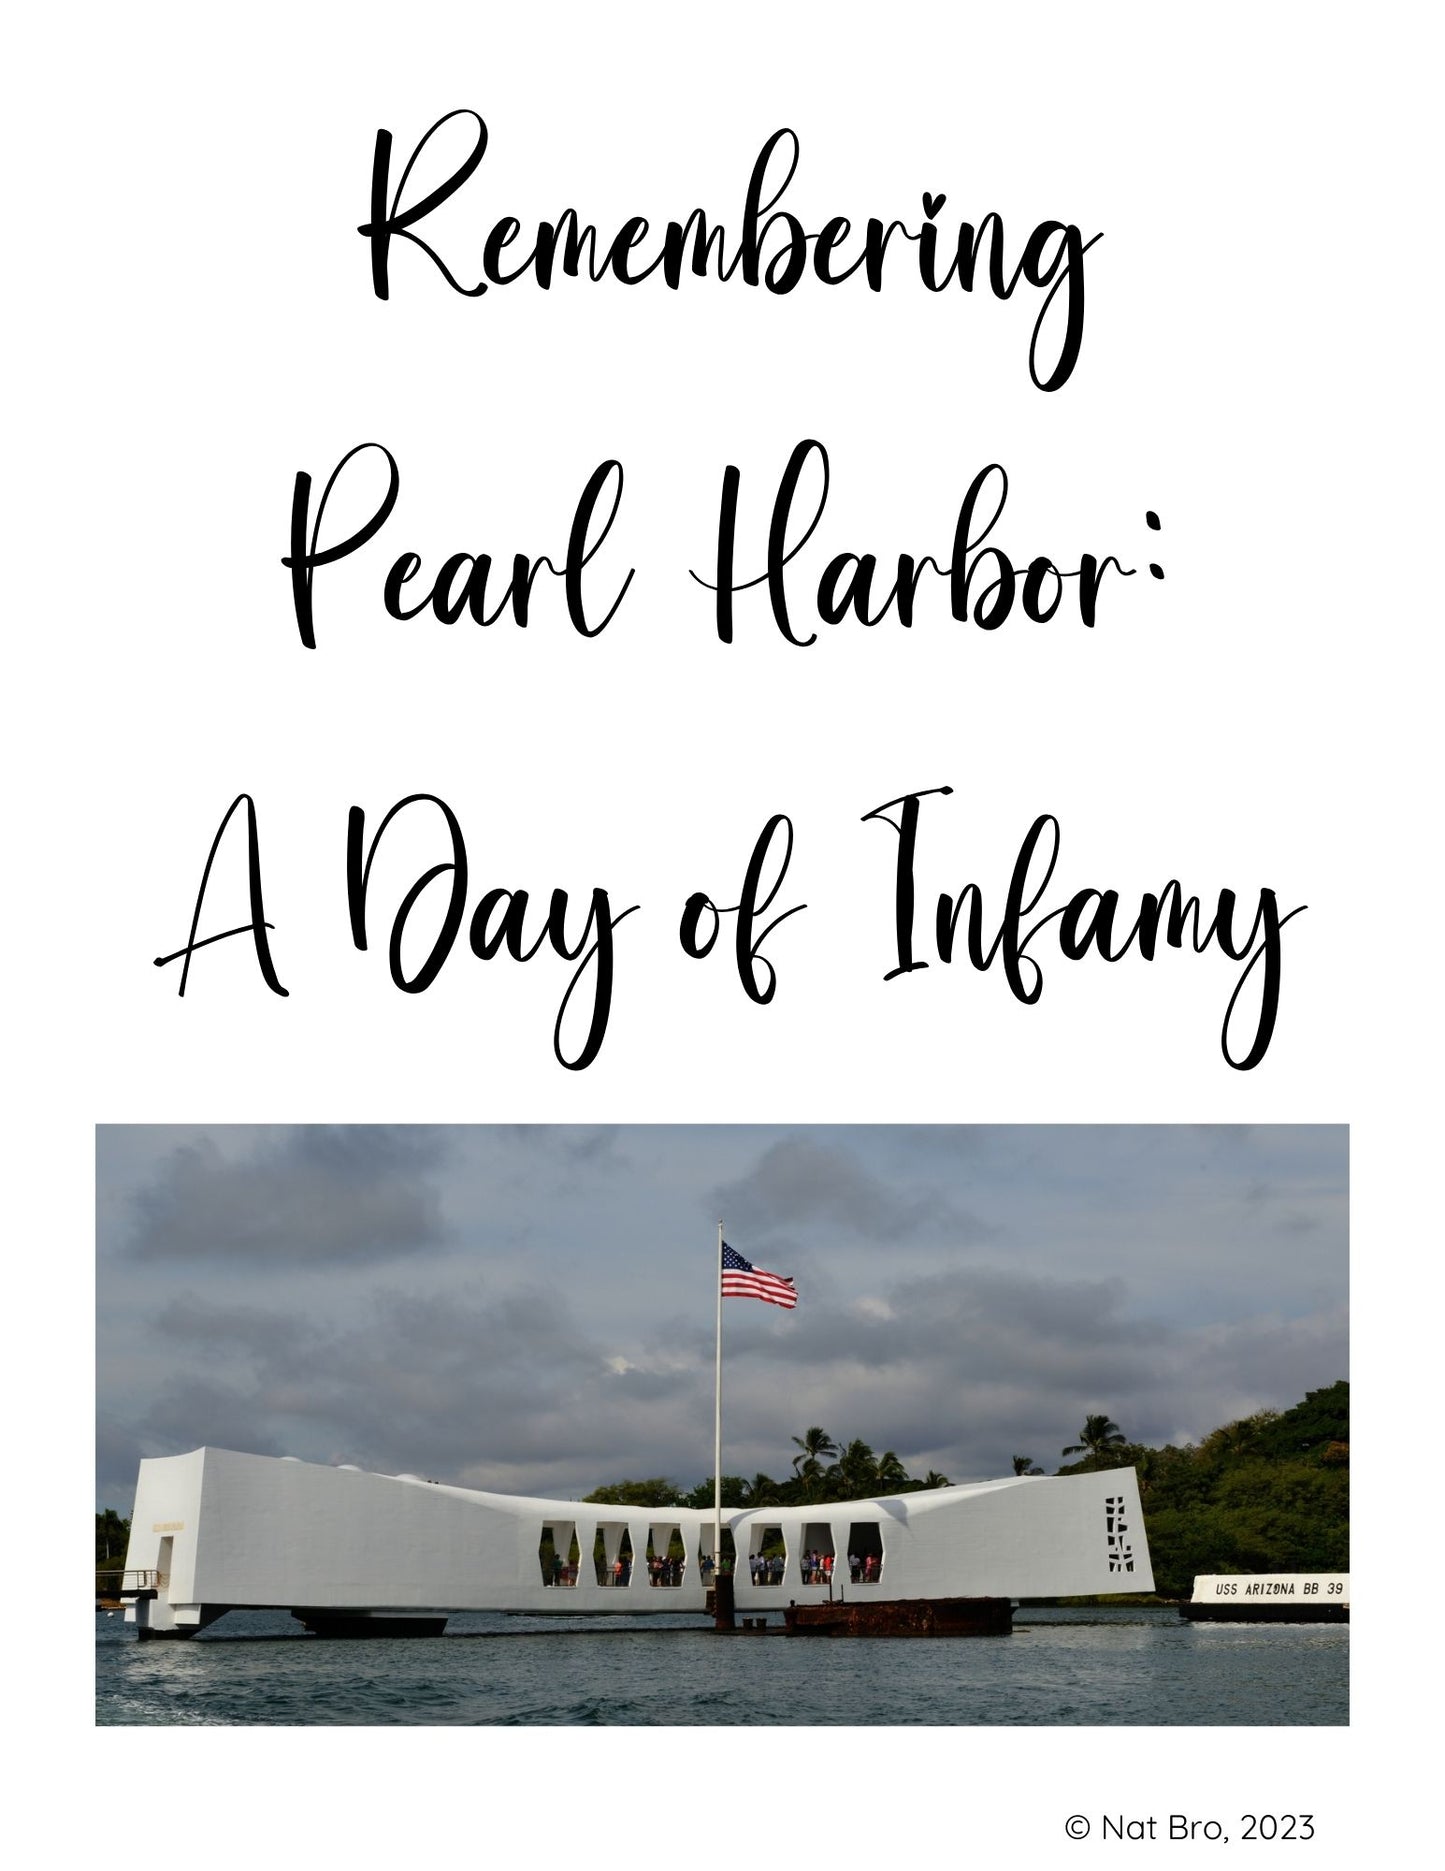 Pearl Harbor: A Unit Study for Middle Schoolers